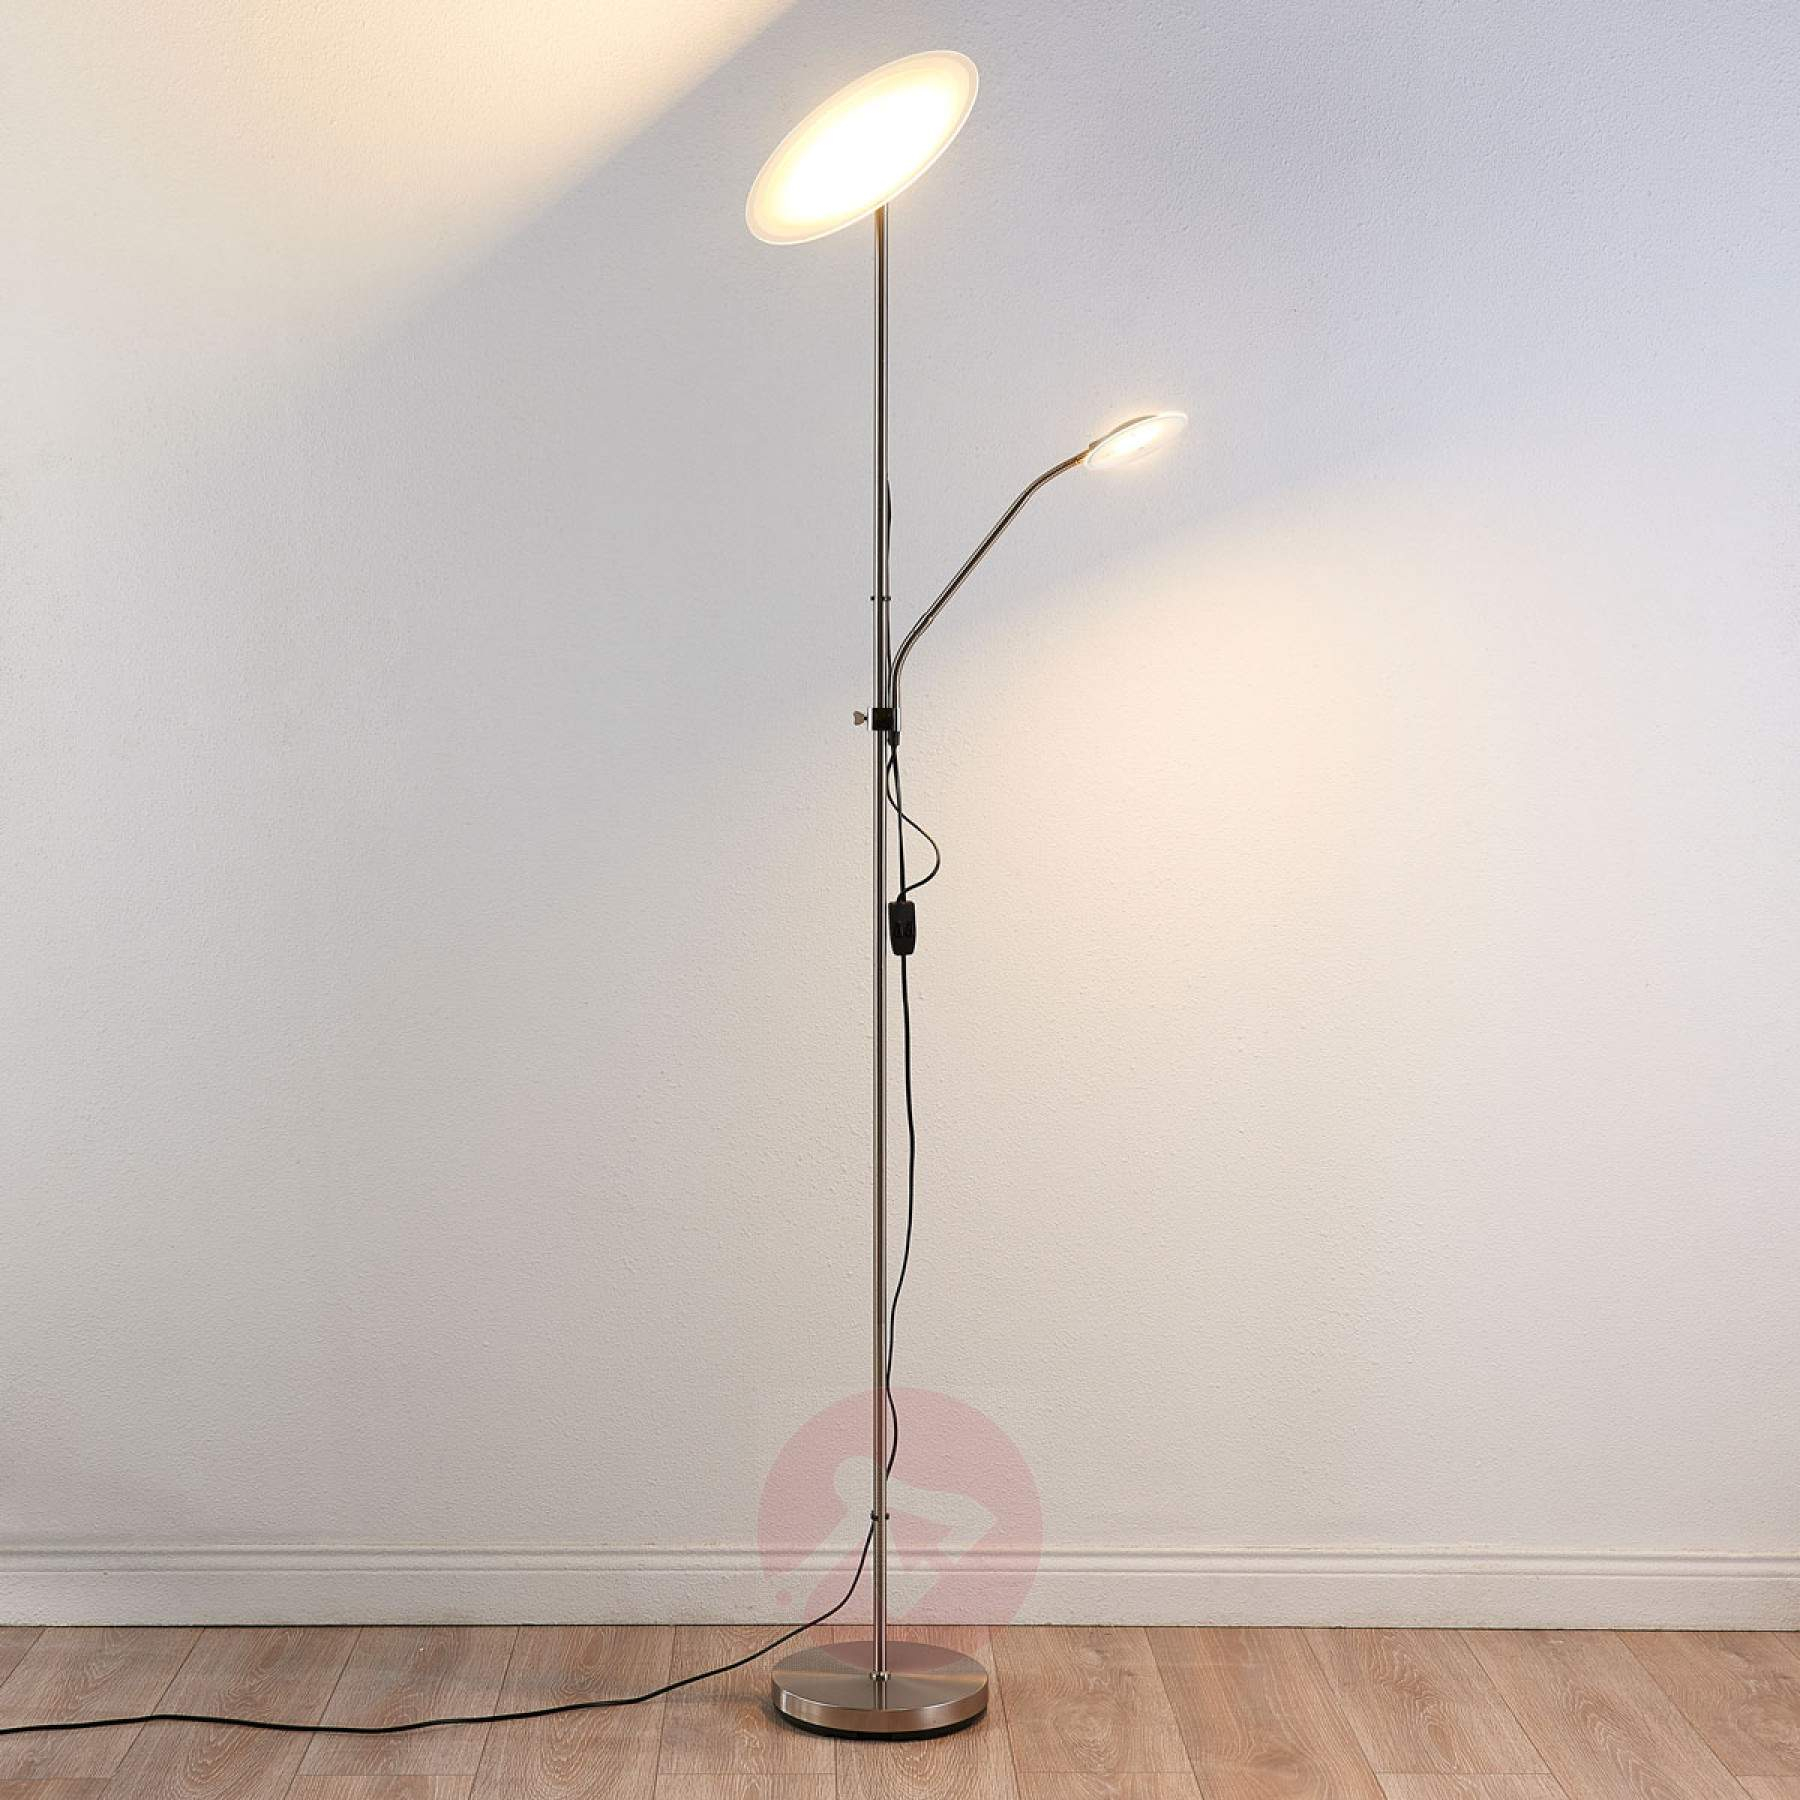 Discreet Led Floor Lamp Ela With Reading Arm within size 1800 X 1800